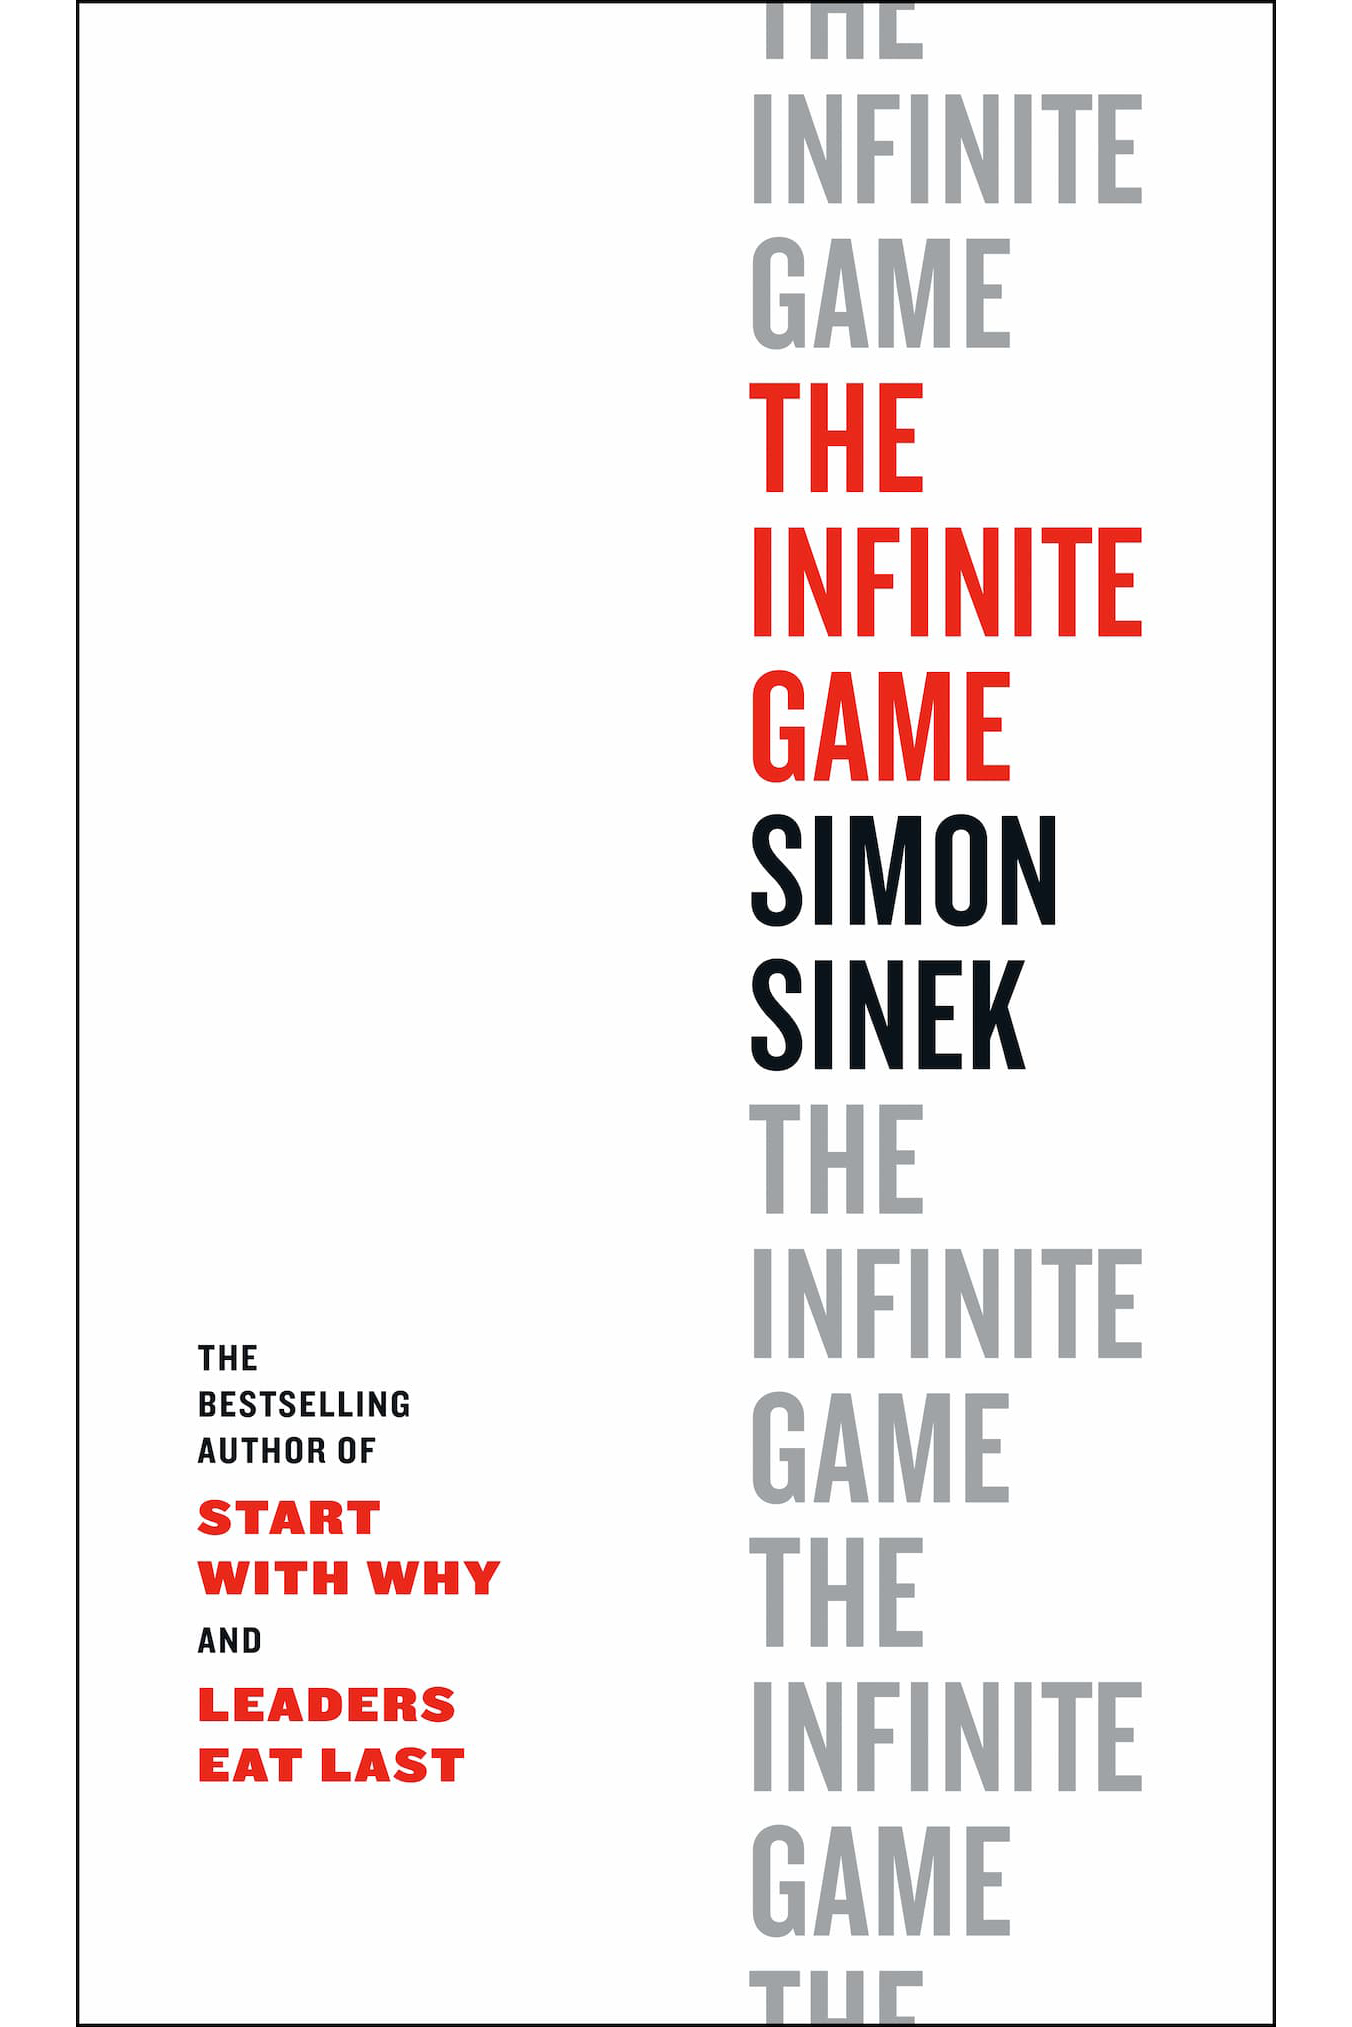 The book cover for The Infinite Game.